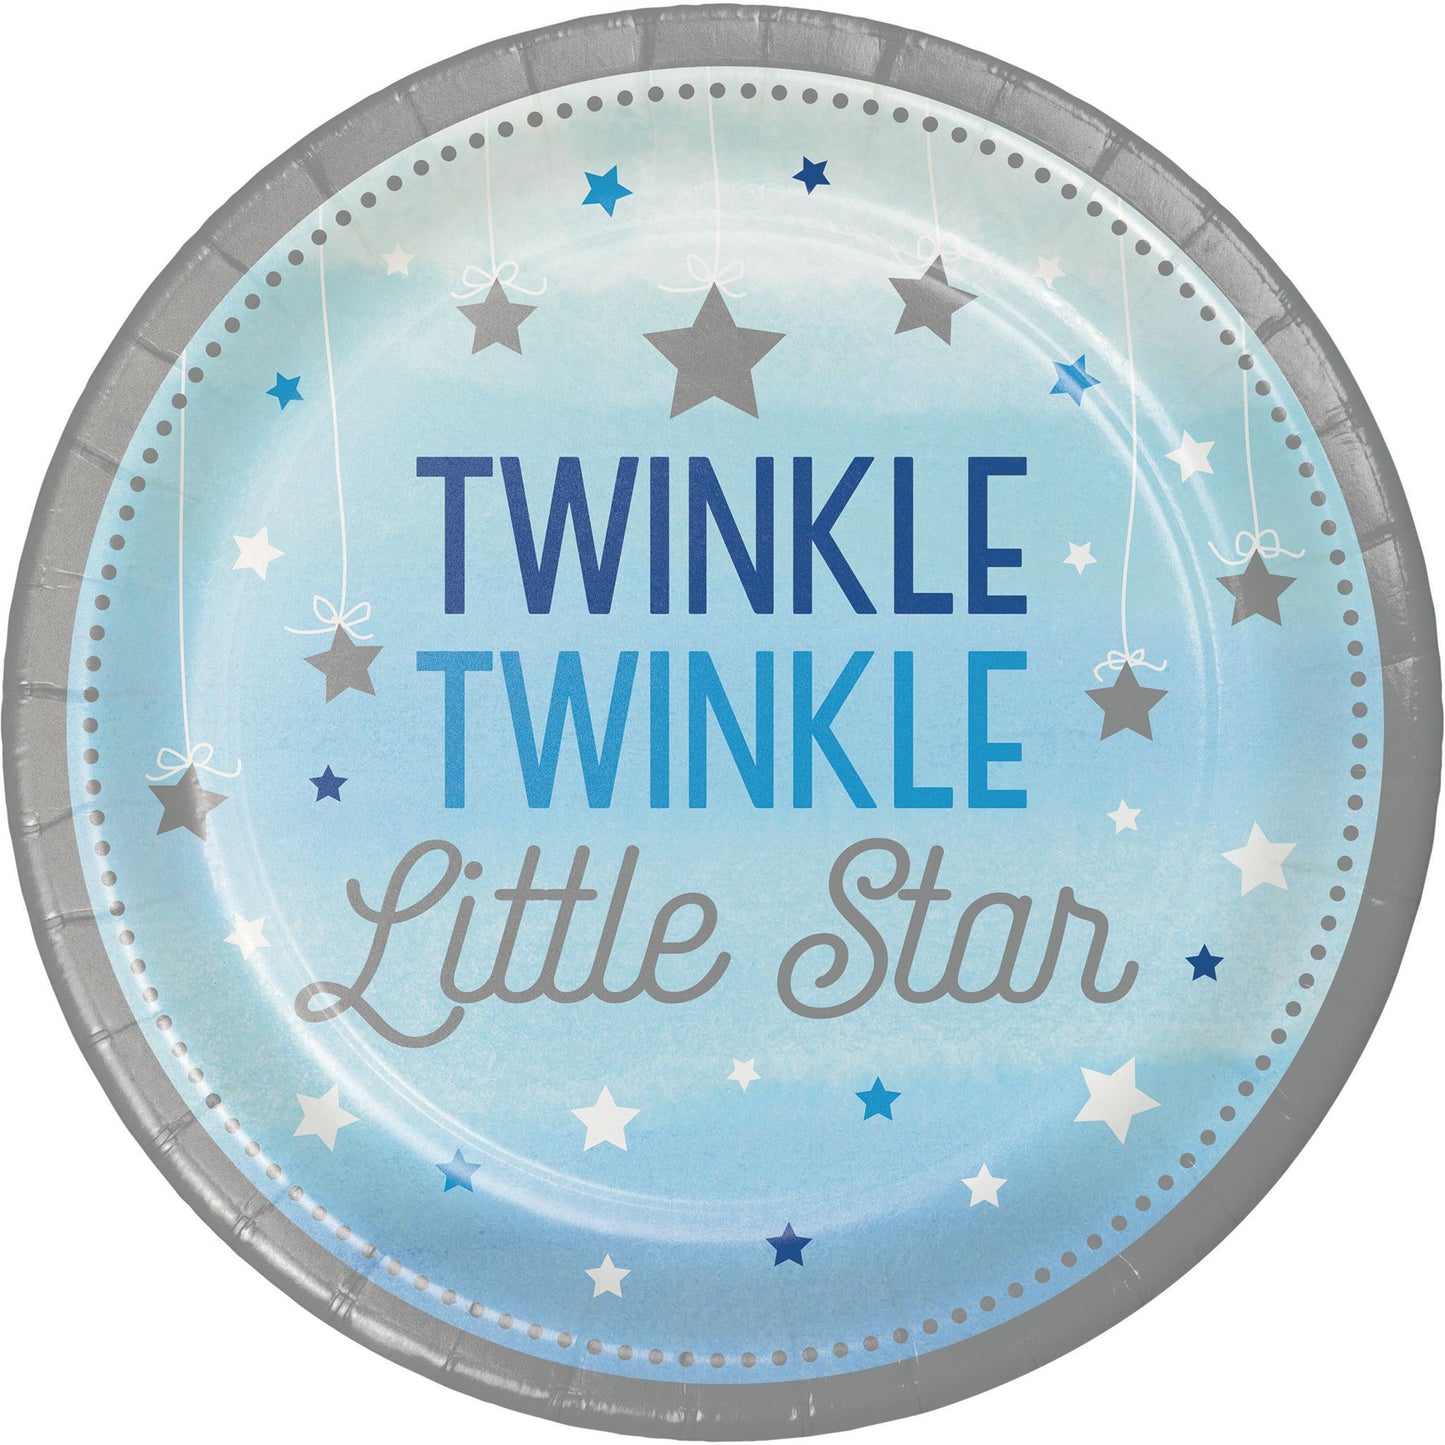 Lunch Plates - One Little Star (Blue) 8ct